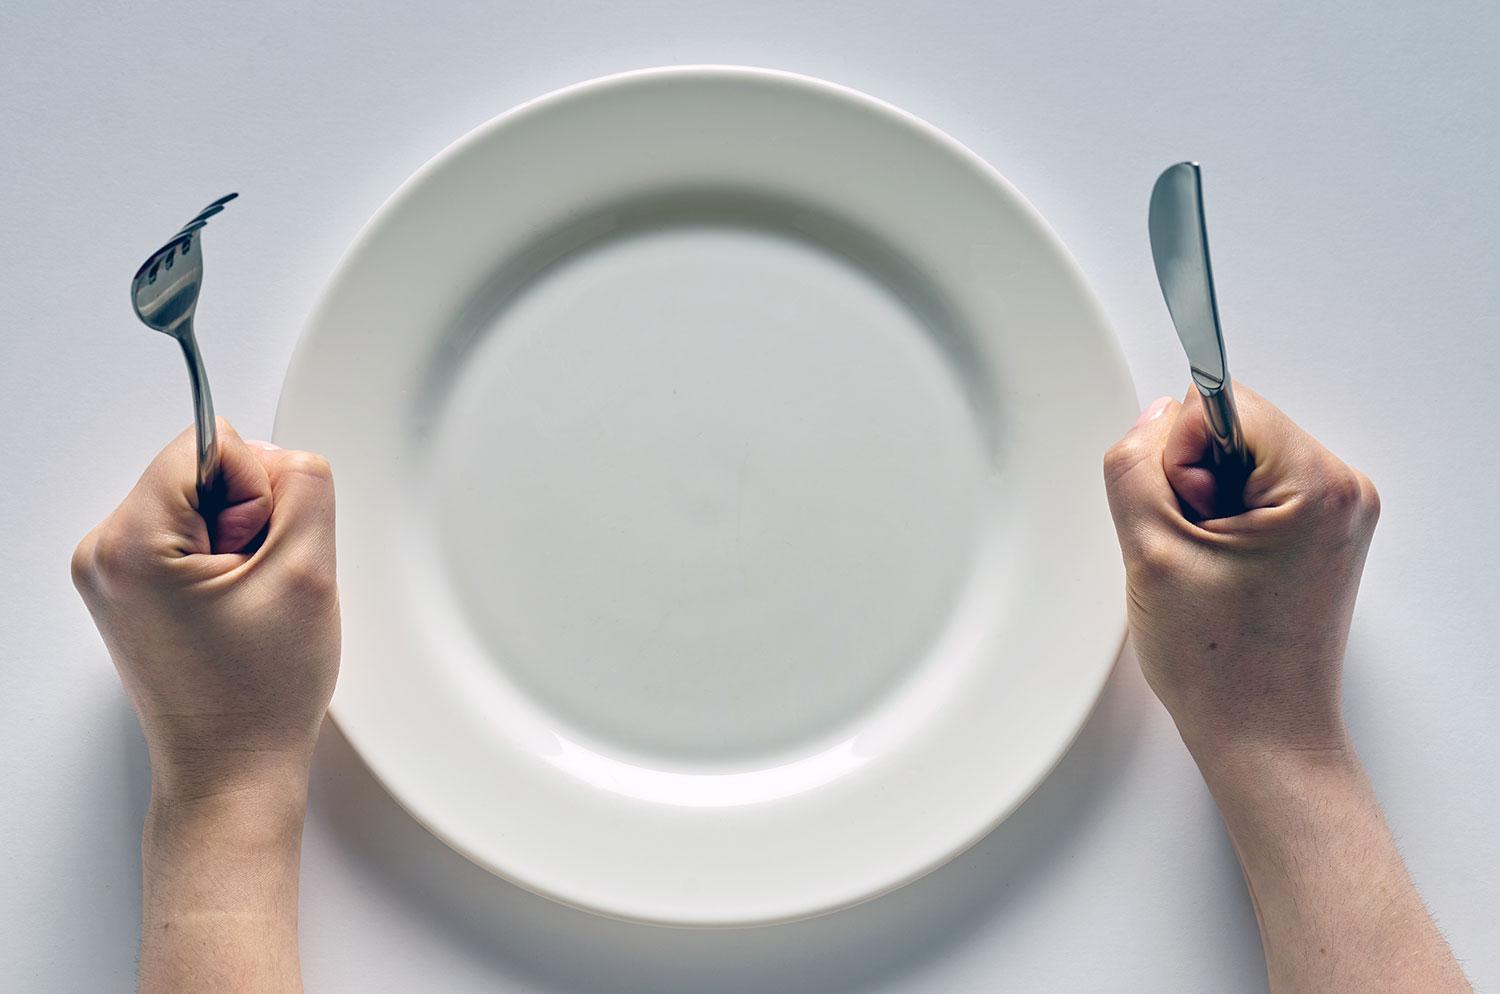 A man holding a knife and fork next to an empty plate